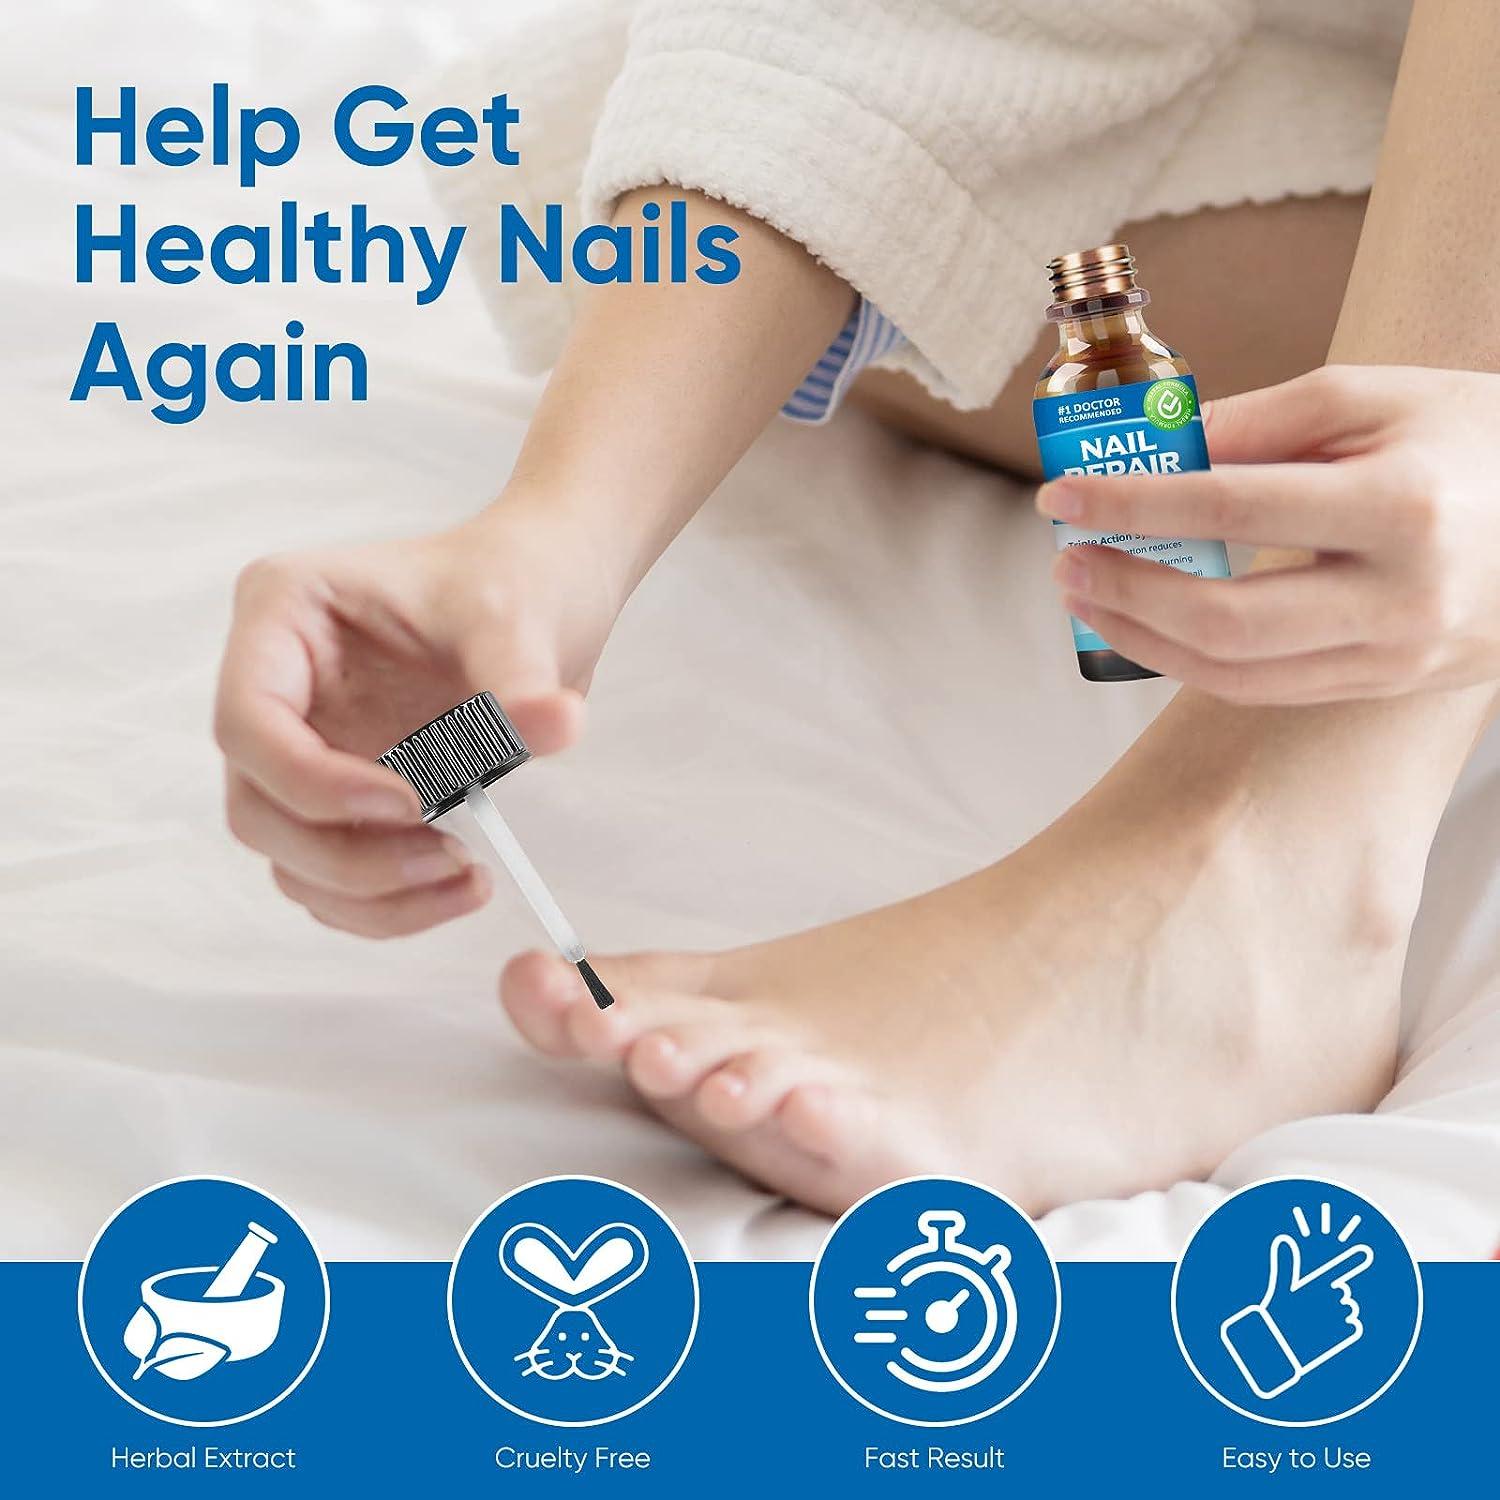 Nail Psoriasis: What It Is, Causes, Nail Pitting, Treatment